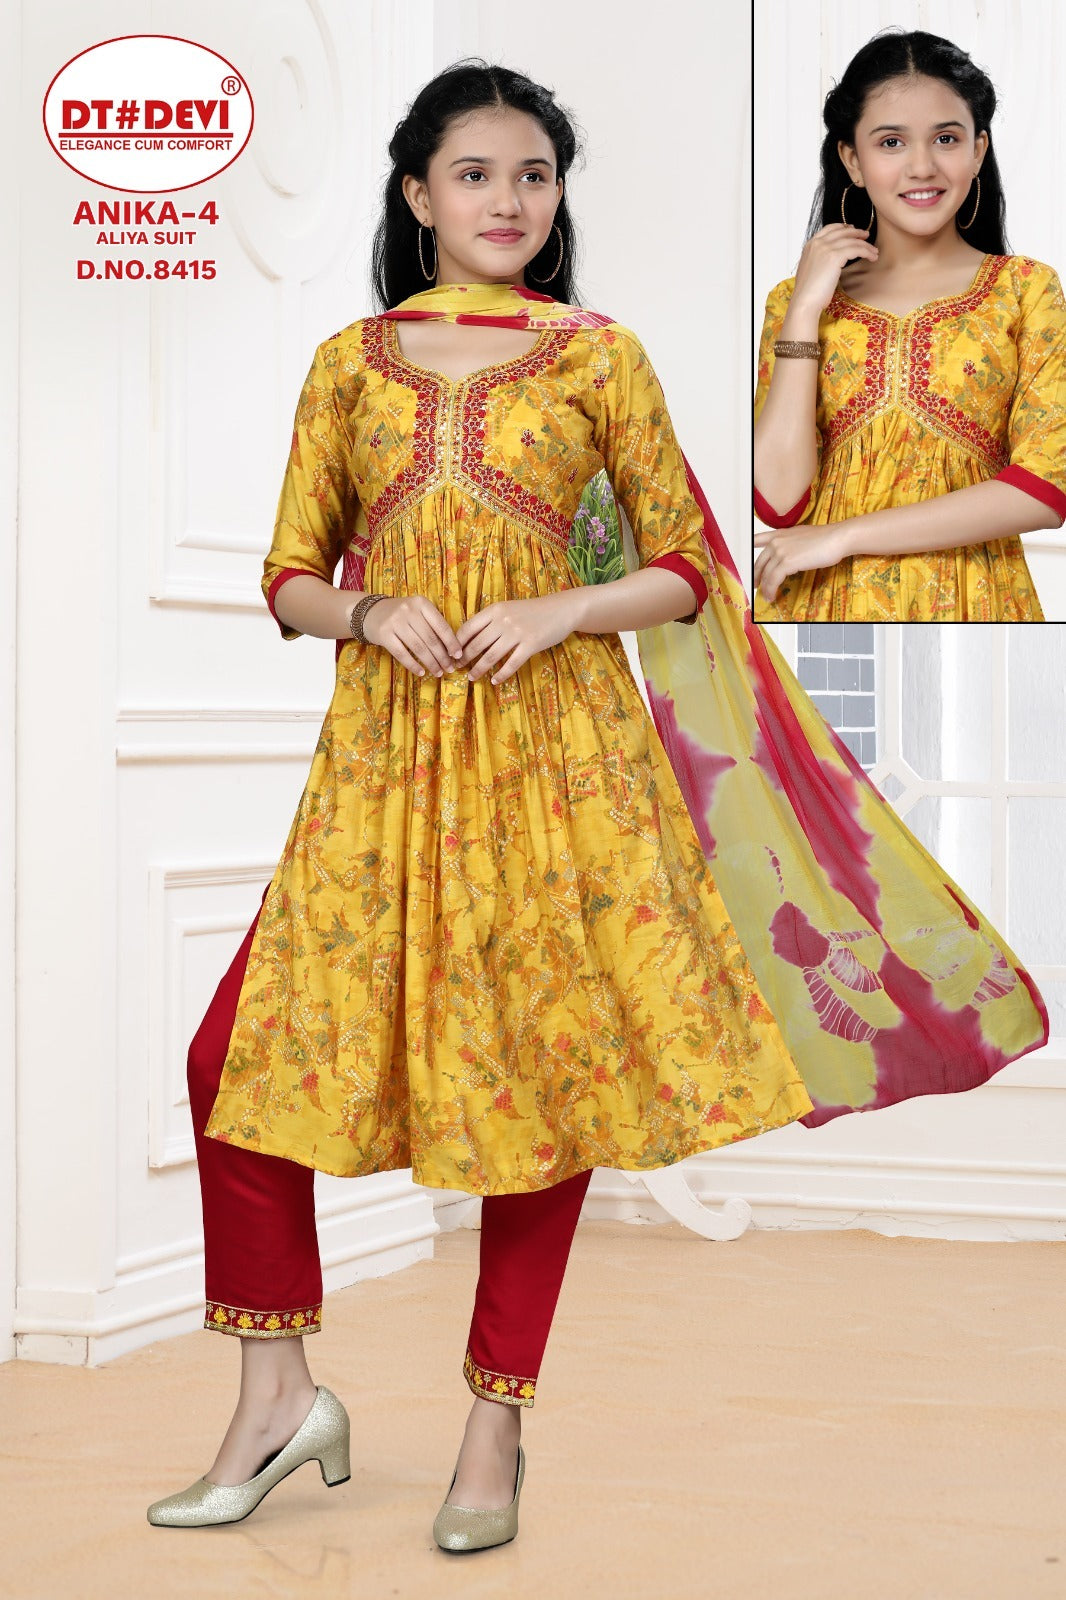 Anika 4 8415 Dt Devi Modal Girls Readymade Pant Suits